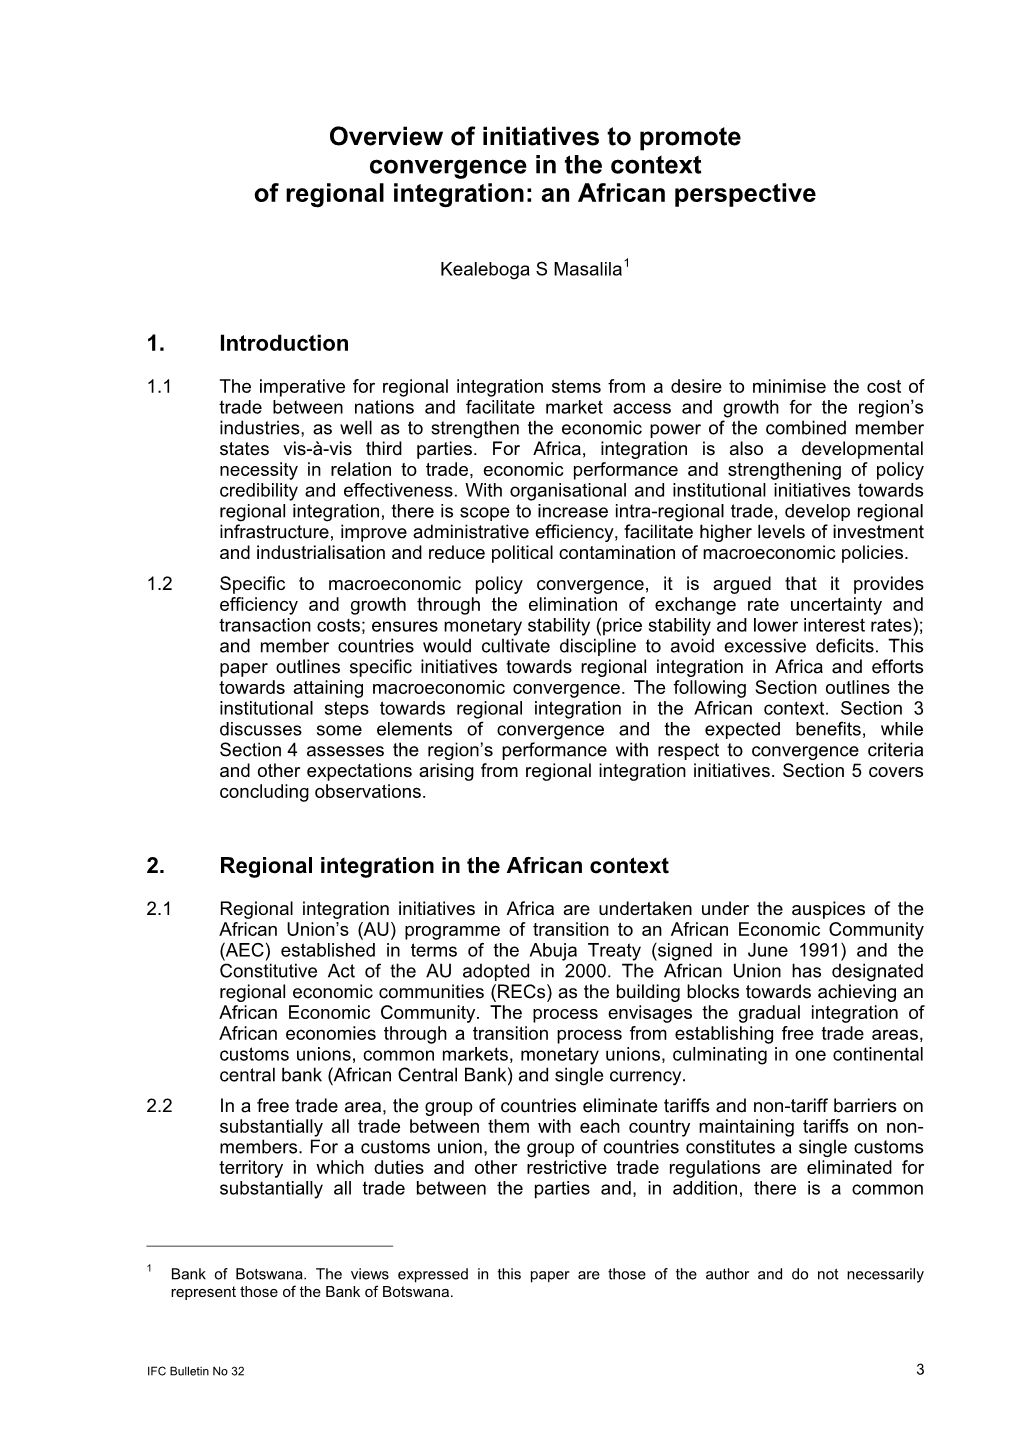 Overview of Initiatives to Promote Convergence in the Context of Regional Integration: an African Perspective